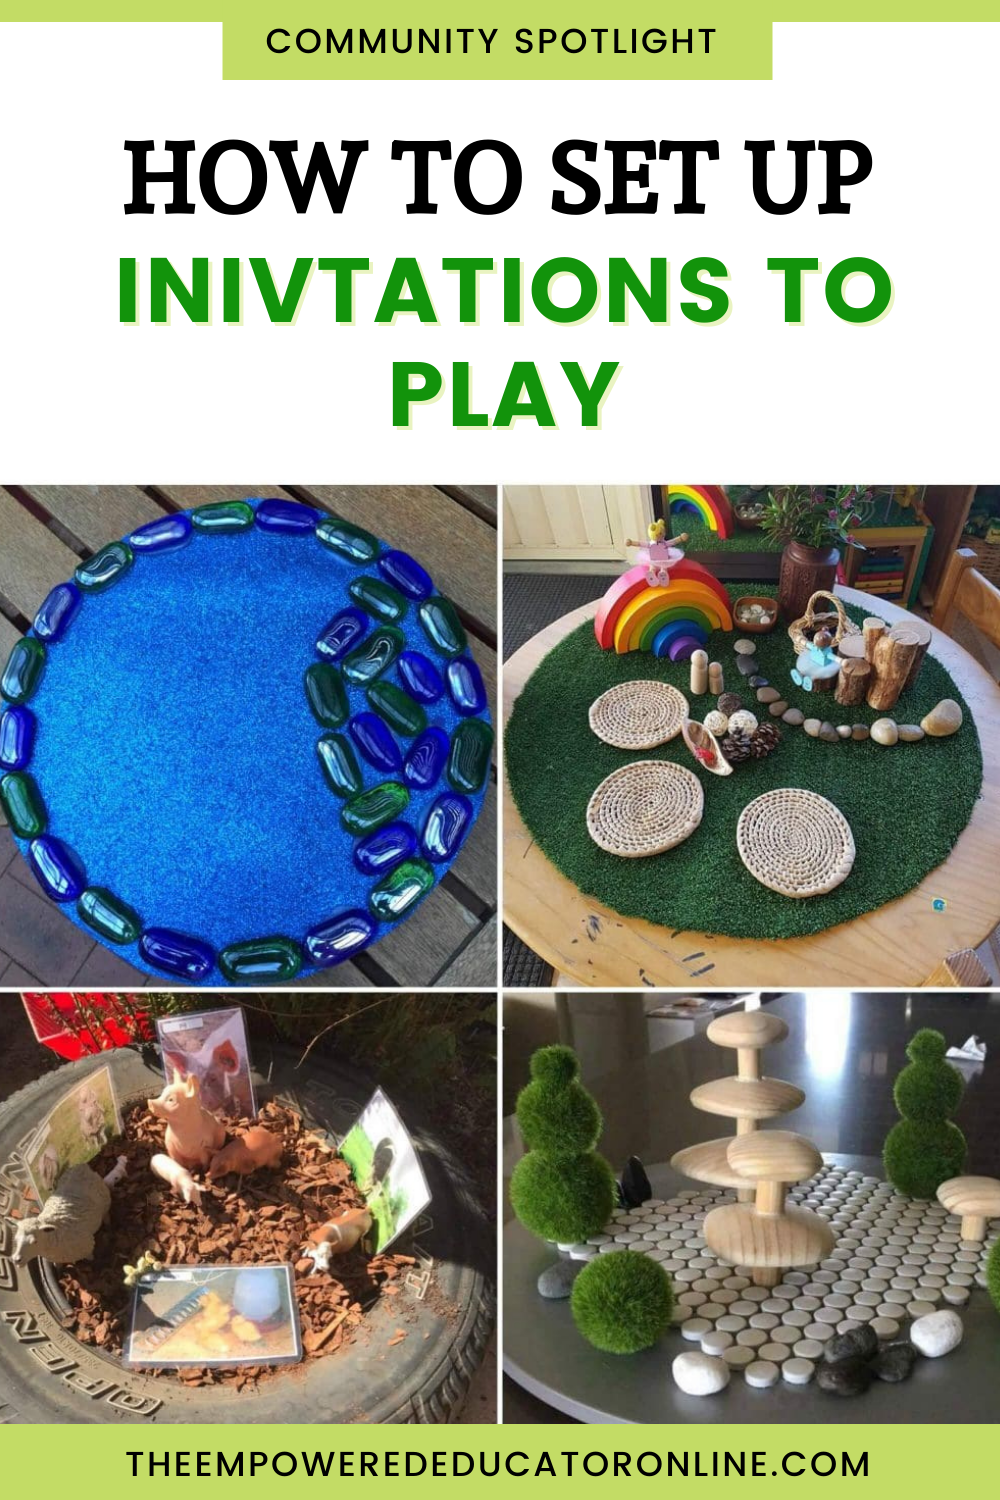 How to Set Up Invitations to Play